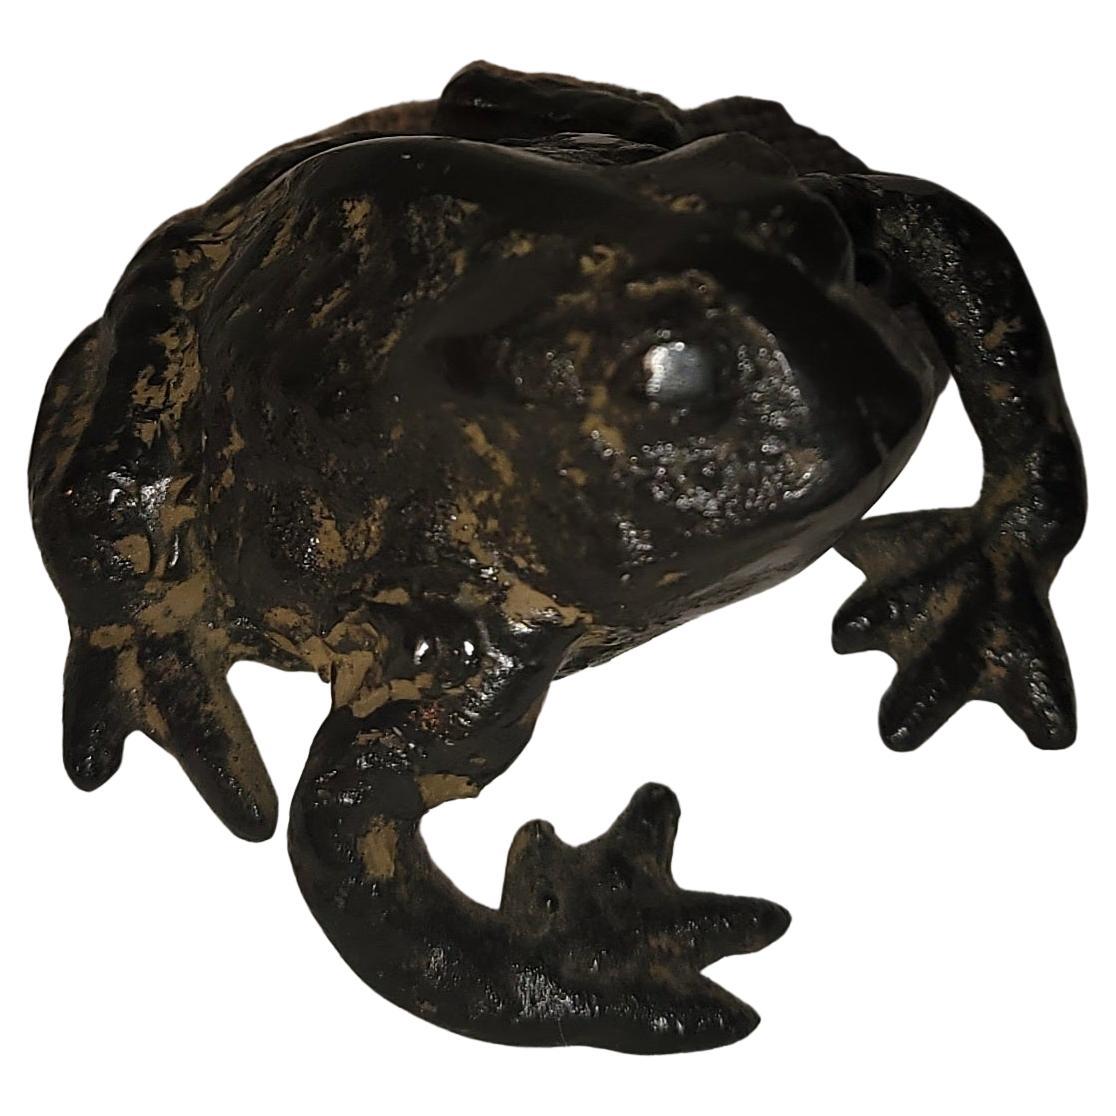 Adirondack Frog Garden Ornament or Desk Weight For Sale